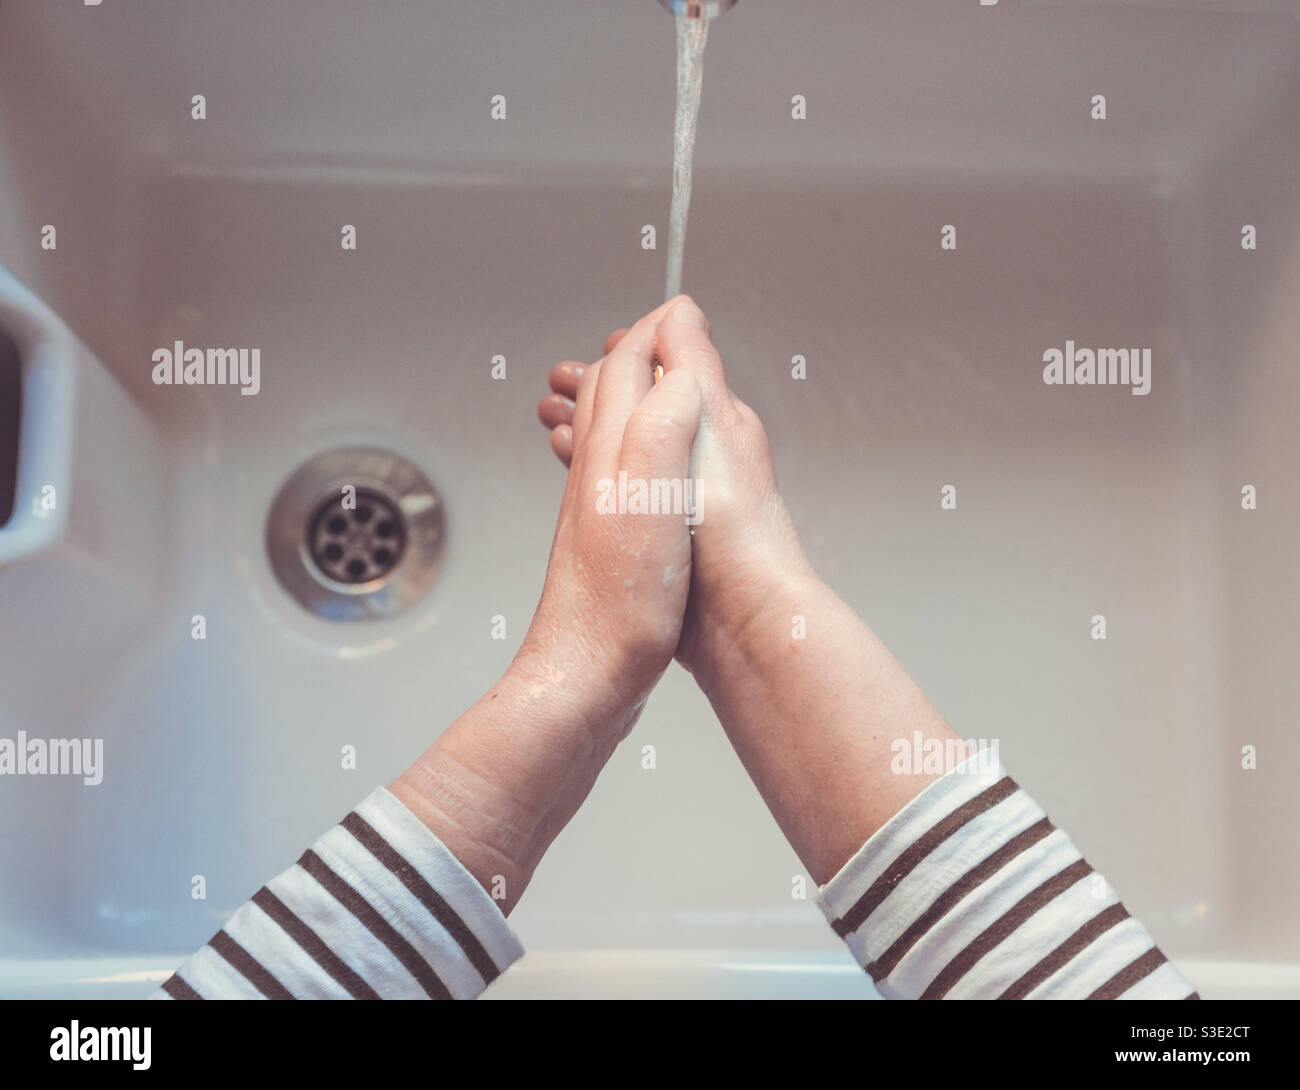 Point of view of a pair of hands washing under a flowing tap and running water above a sink with plug hole Stock Photo